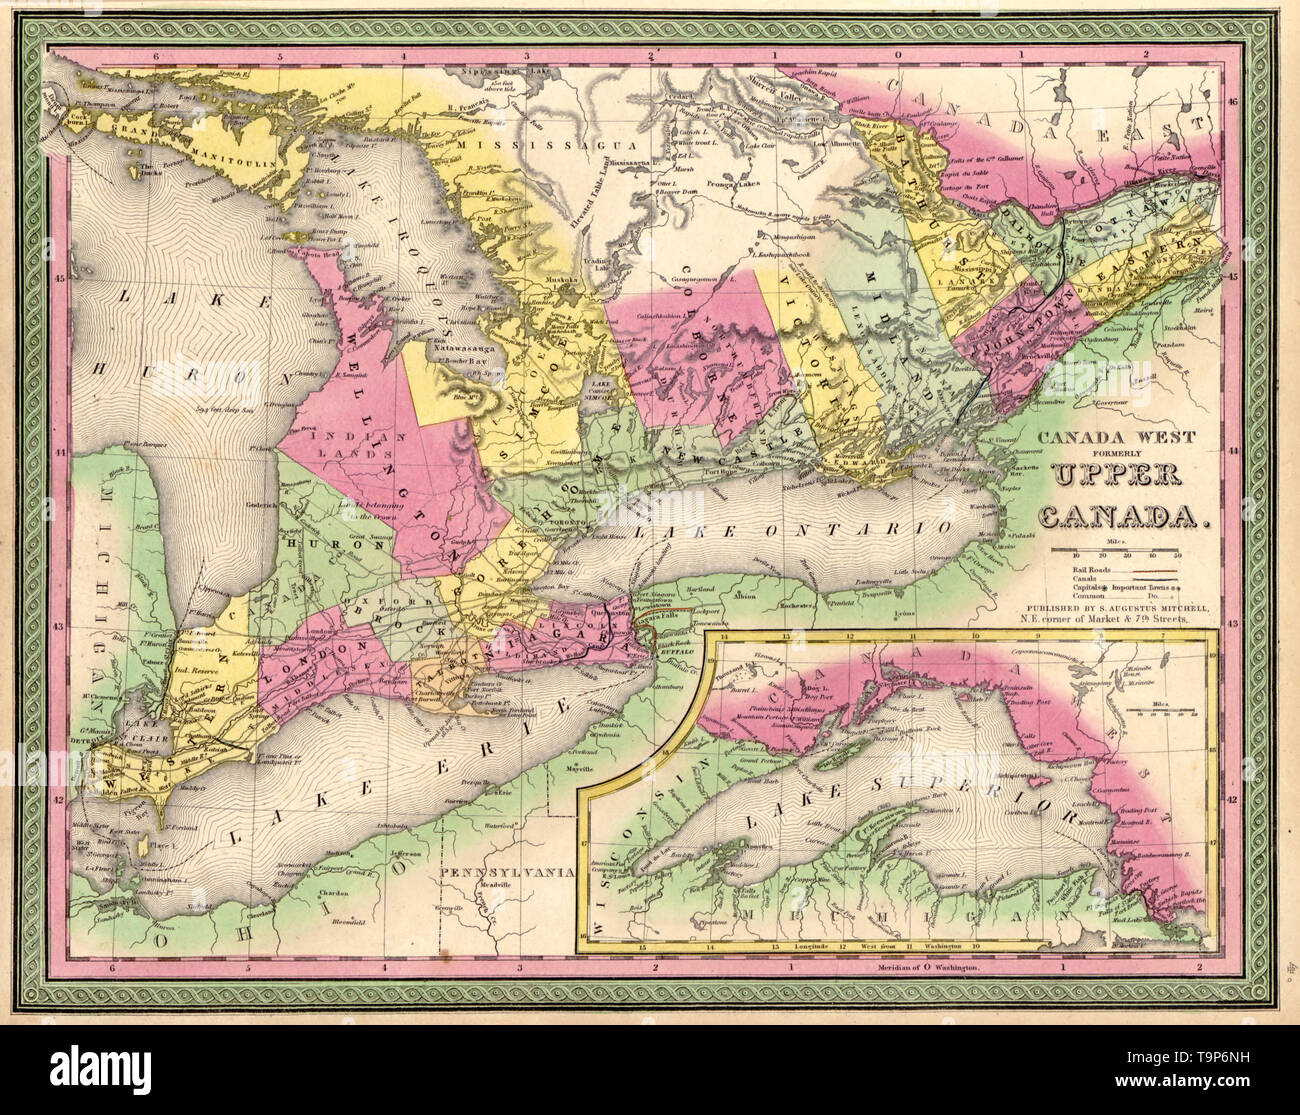 Map of Canada West, formerly Upper Canada, 1849 Stock Photo